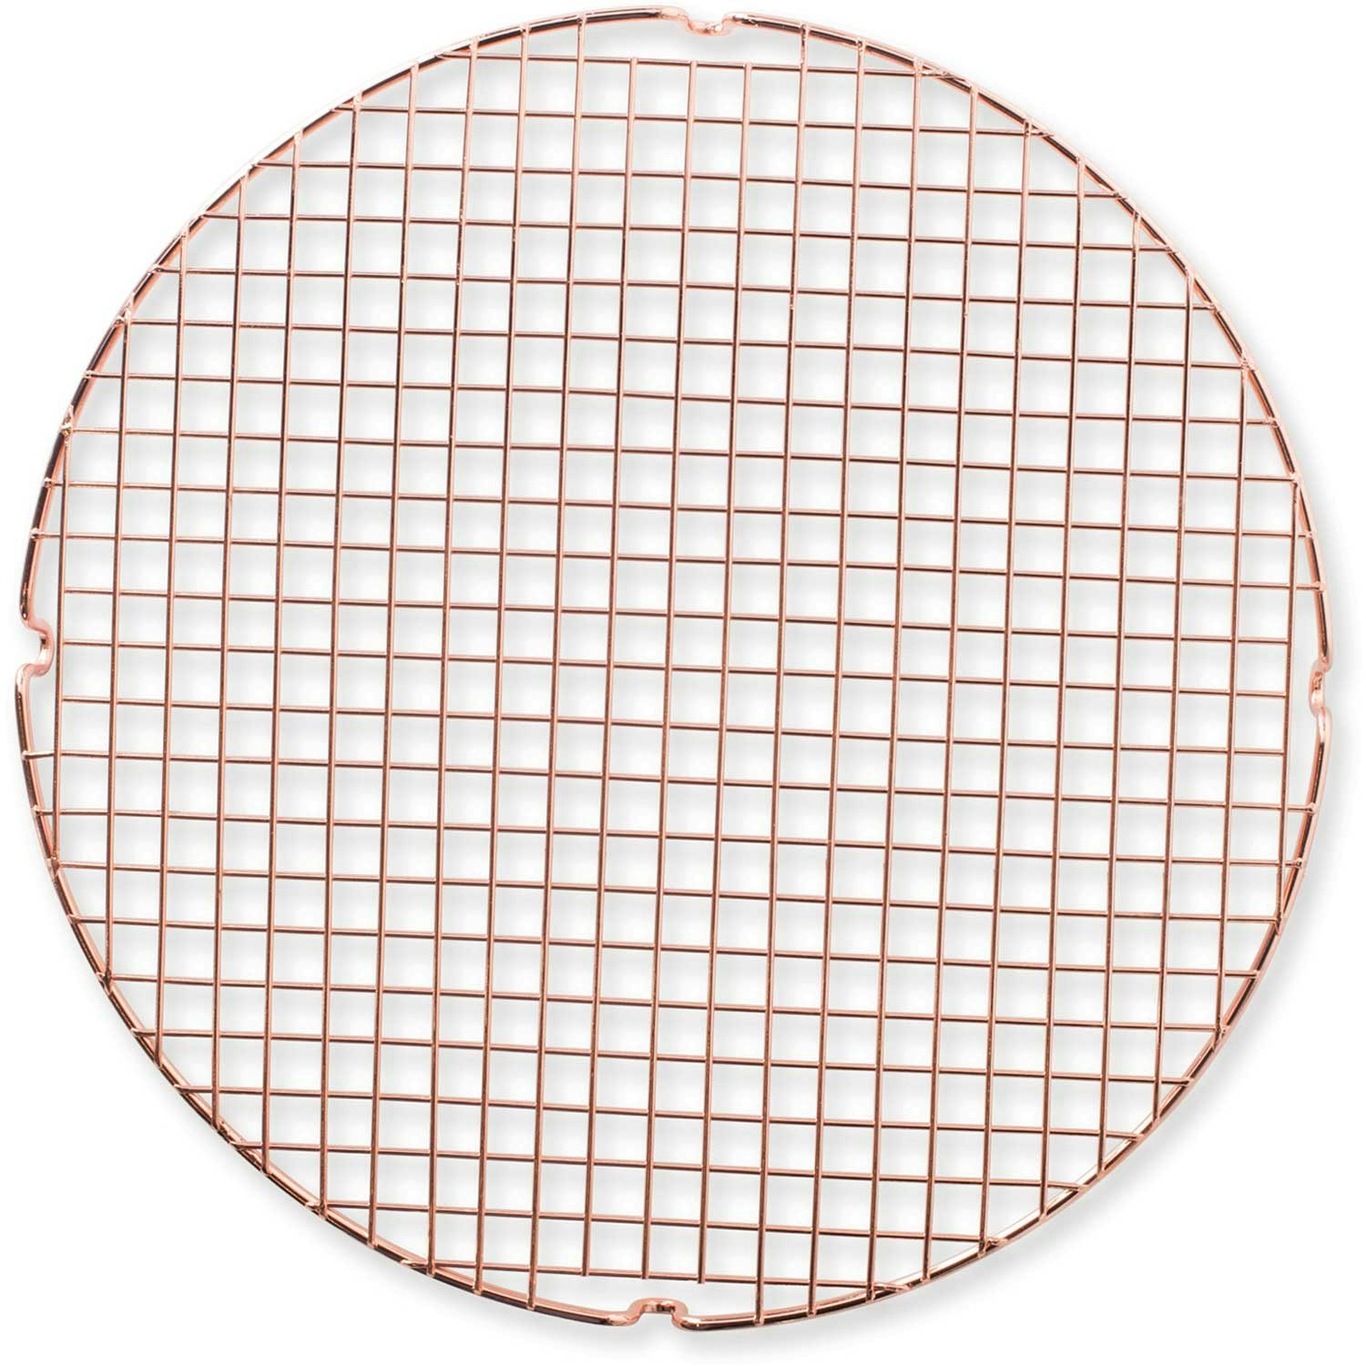 https://royaldesign.com/image/2/nordic-ware-around-swallowing-grids-in-copper-0?w=800&quality=80